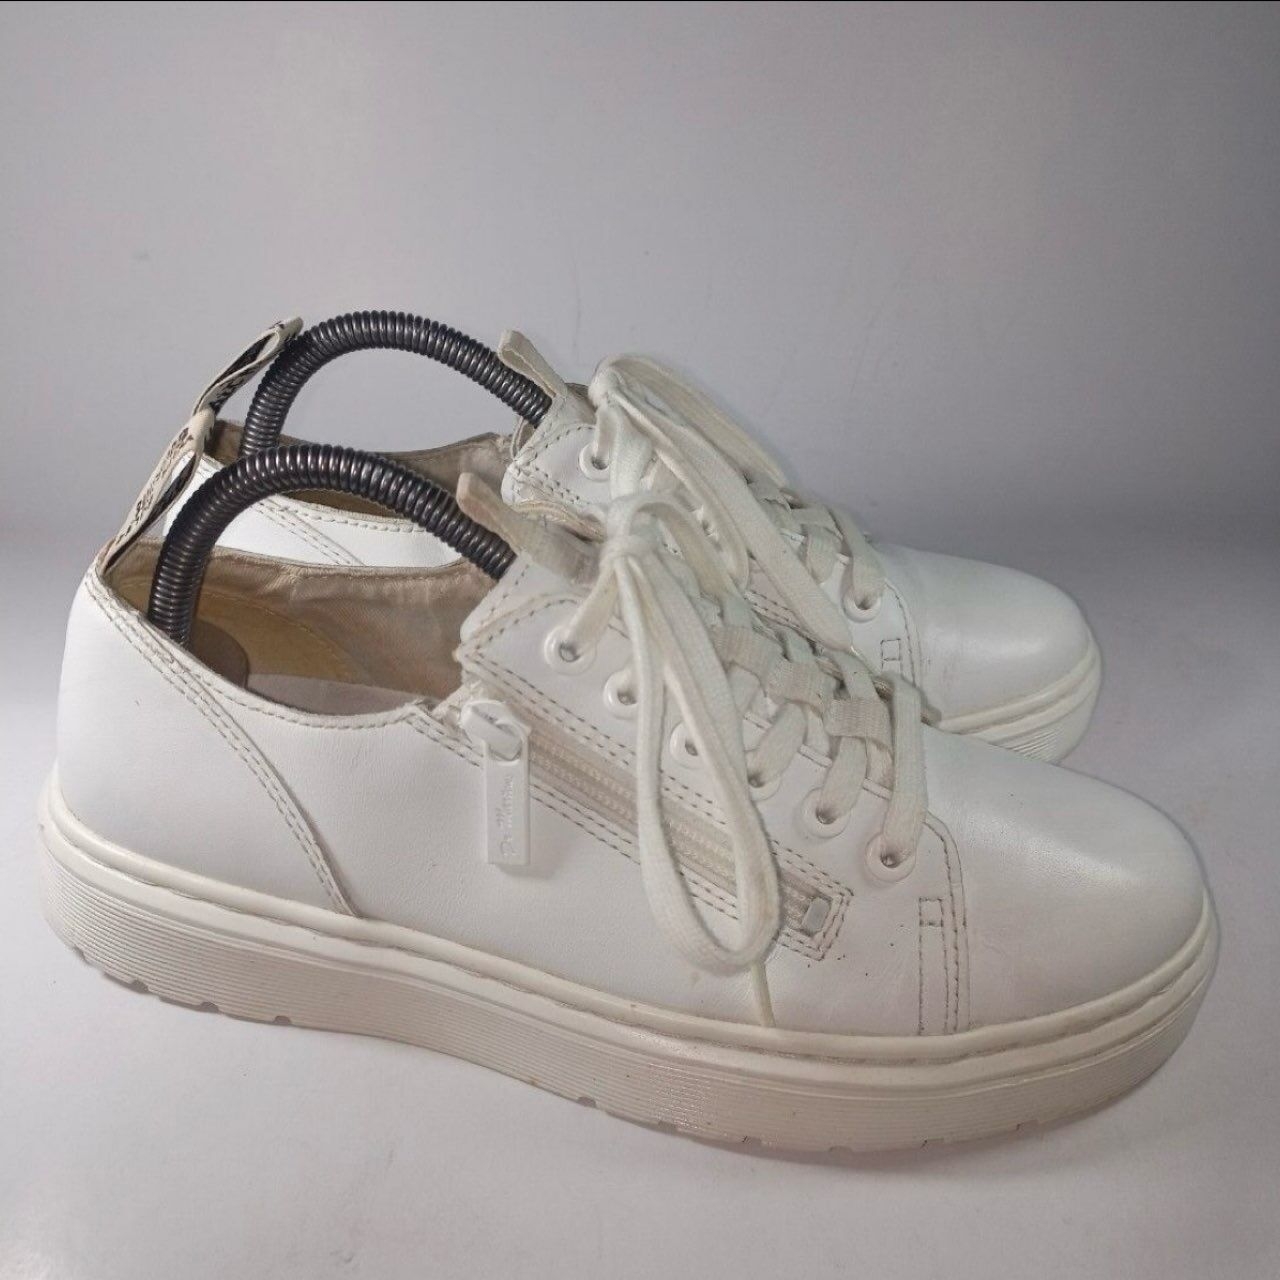 Dr. Martens Dante Zip Distressed White Leather Sneakers